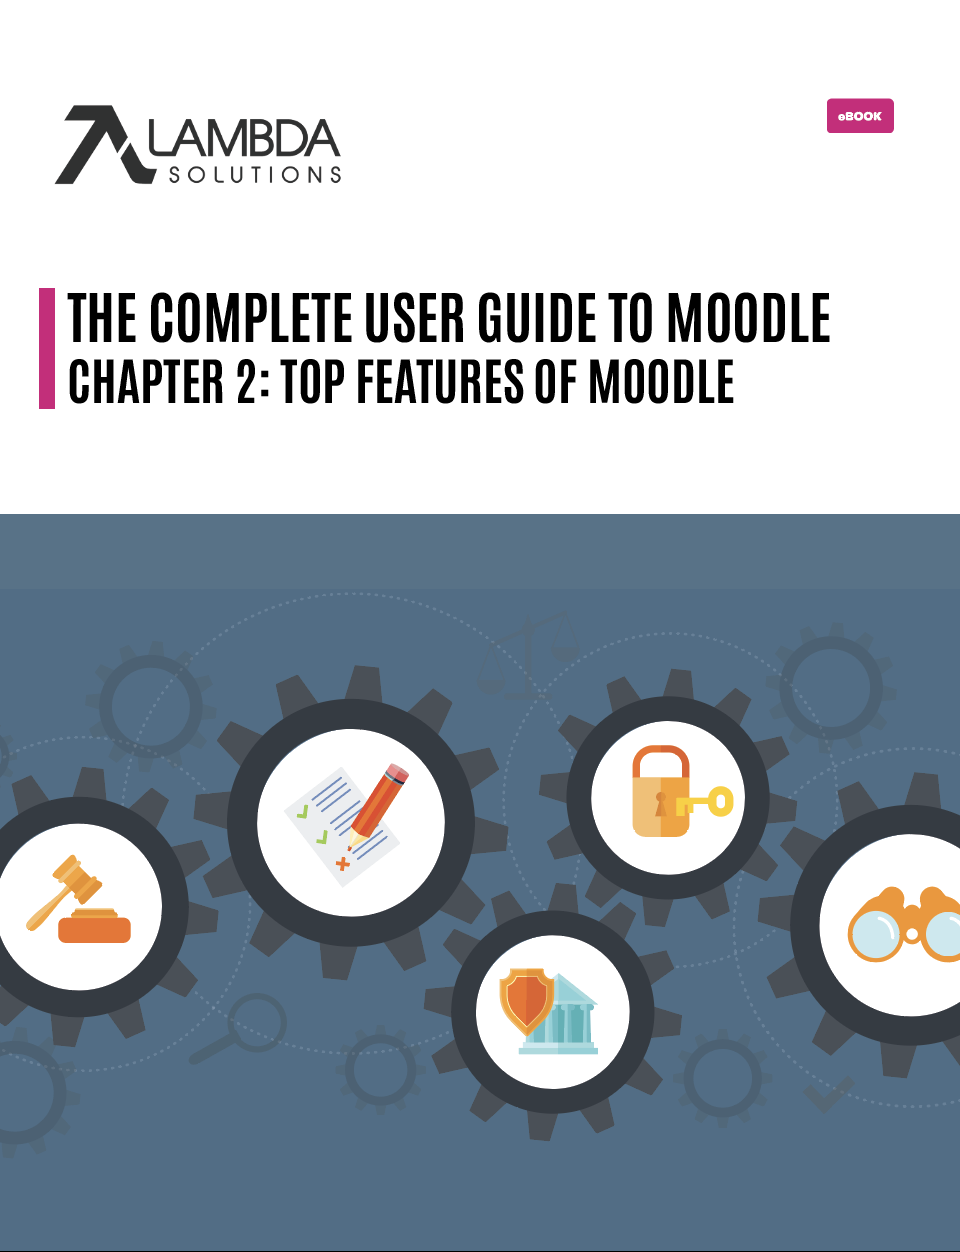 Top Features Of Moodle by Lambda